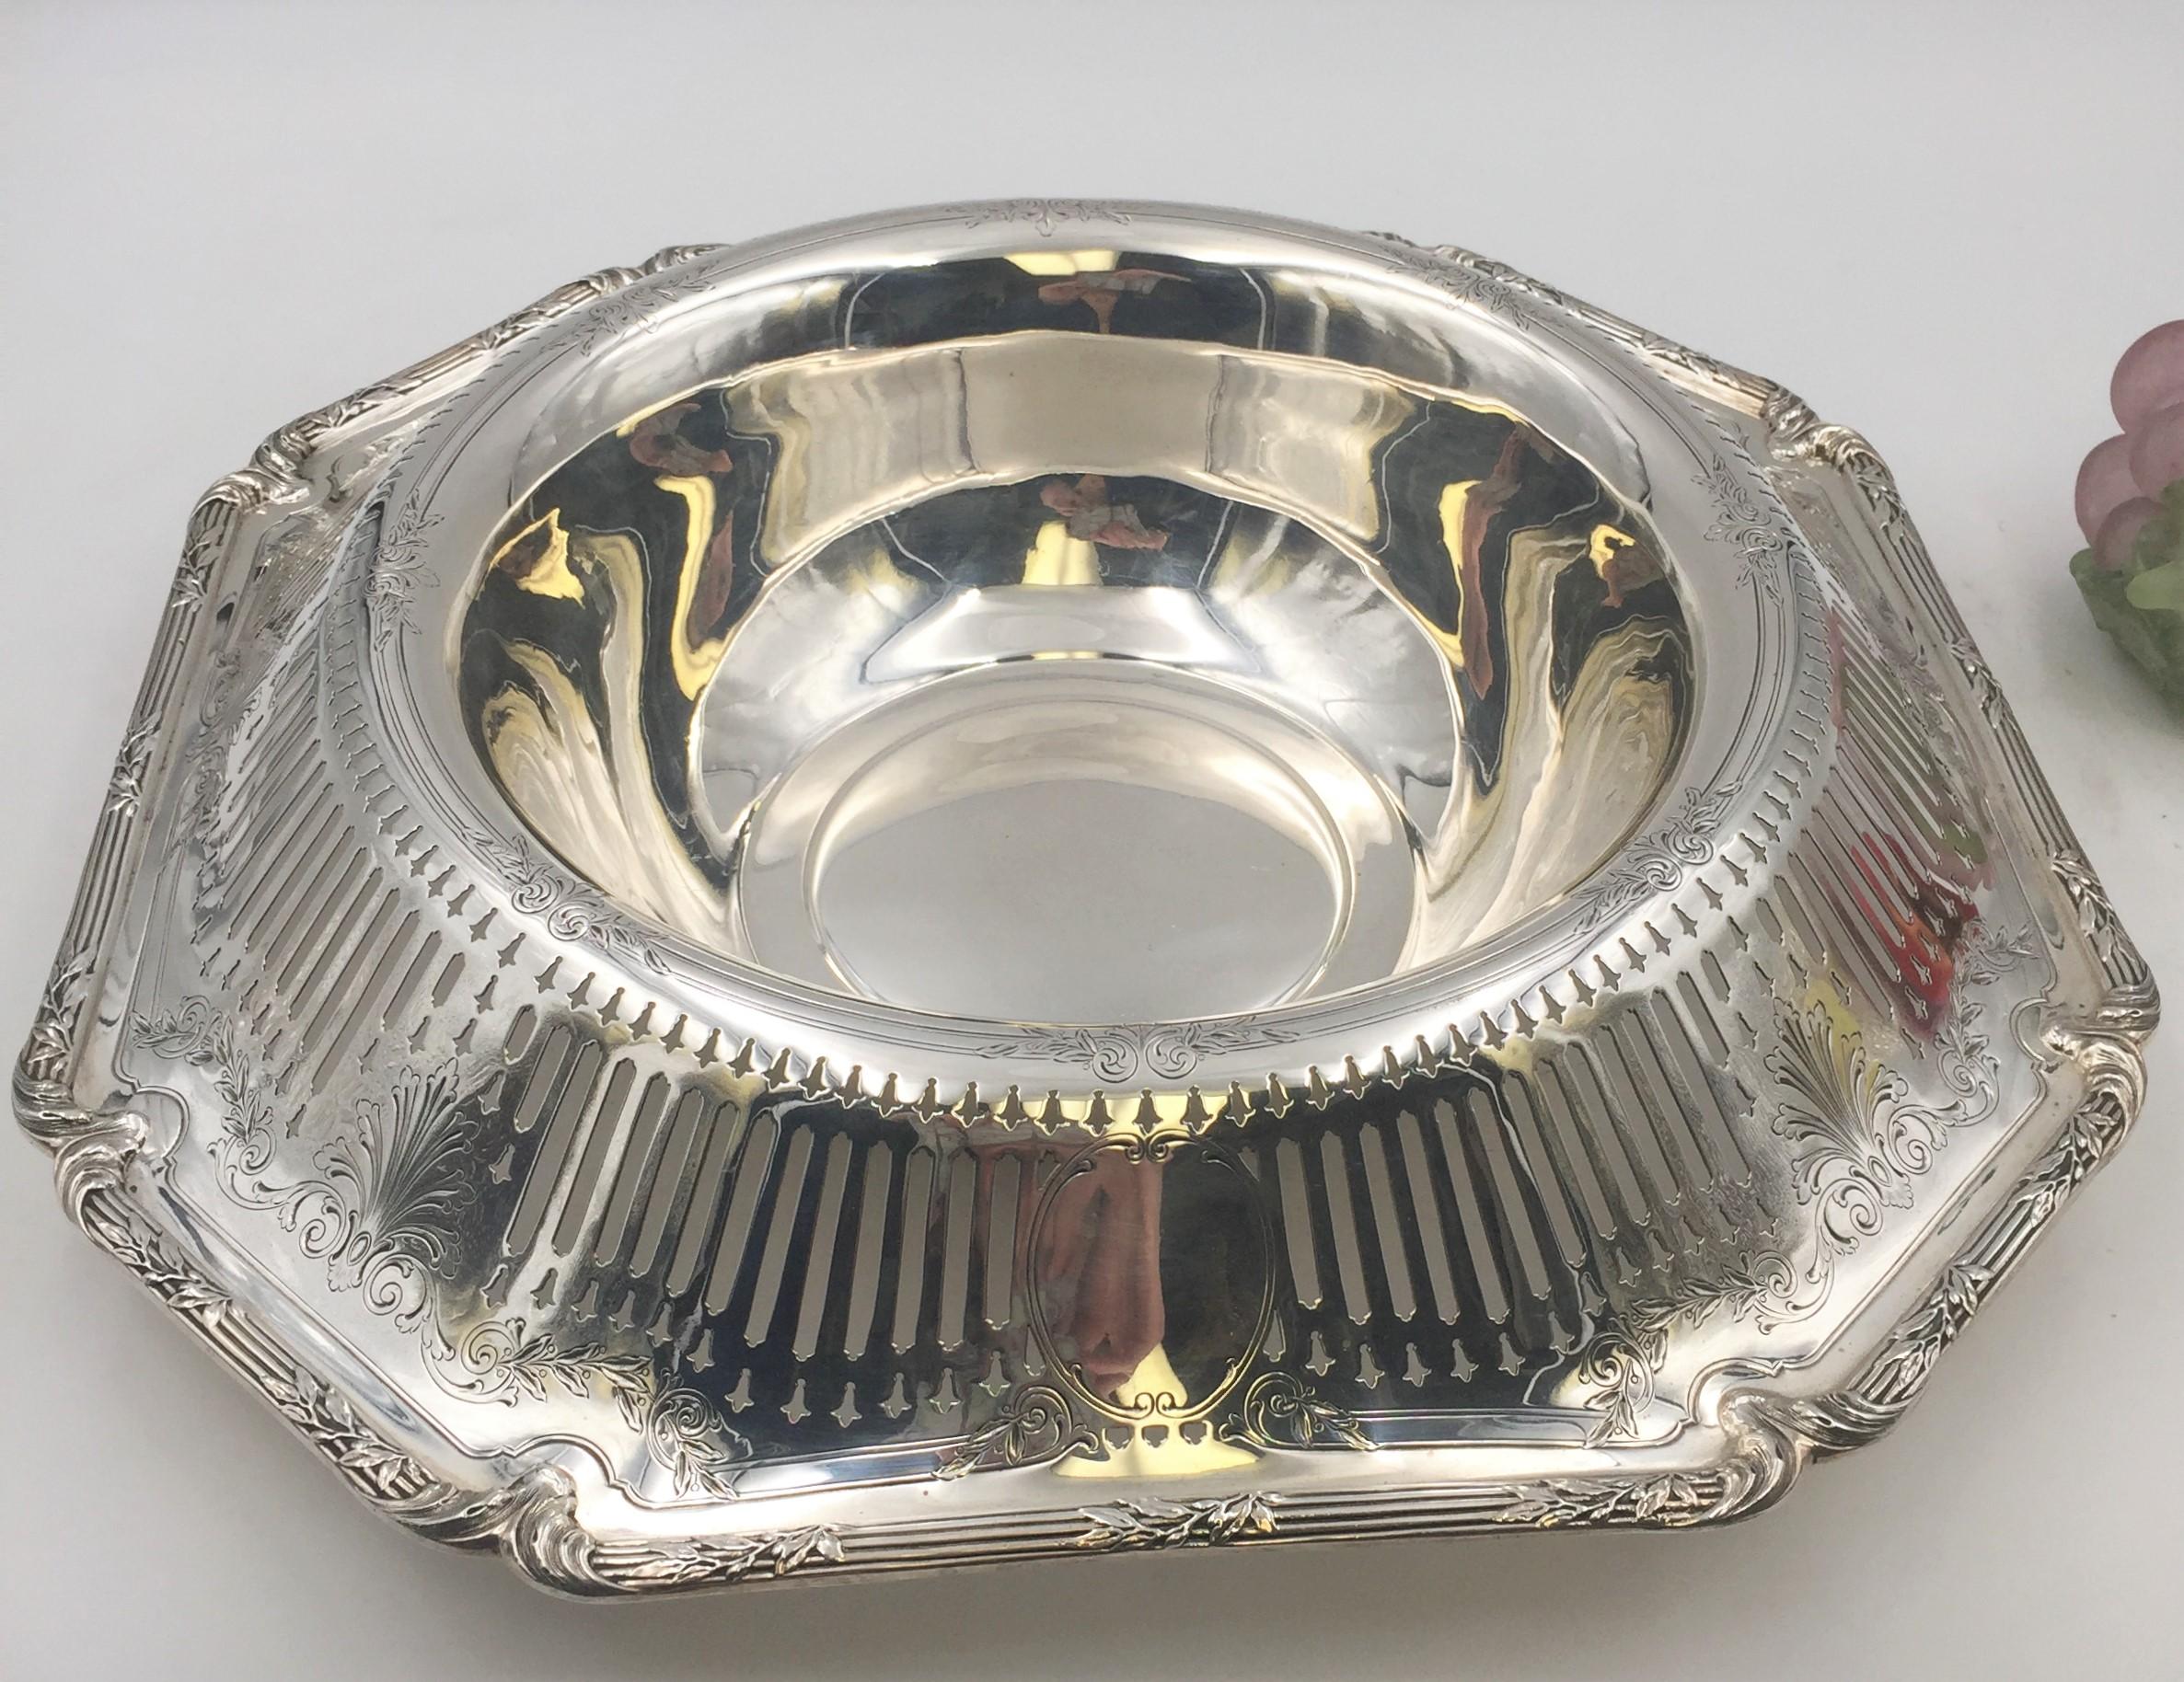 Beautiful Shreve & Co sterling silver large centerpiece bowl with a roll over lip pierced with Fleur-de-lis pattern. Perfect for the holidays and other special occasions! Measurements: Height: 7 inches, Width: 16 inches, Weight: 45 ozt. Bearing